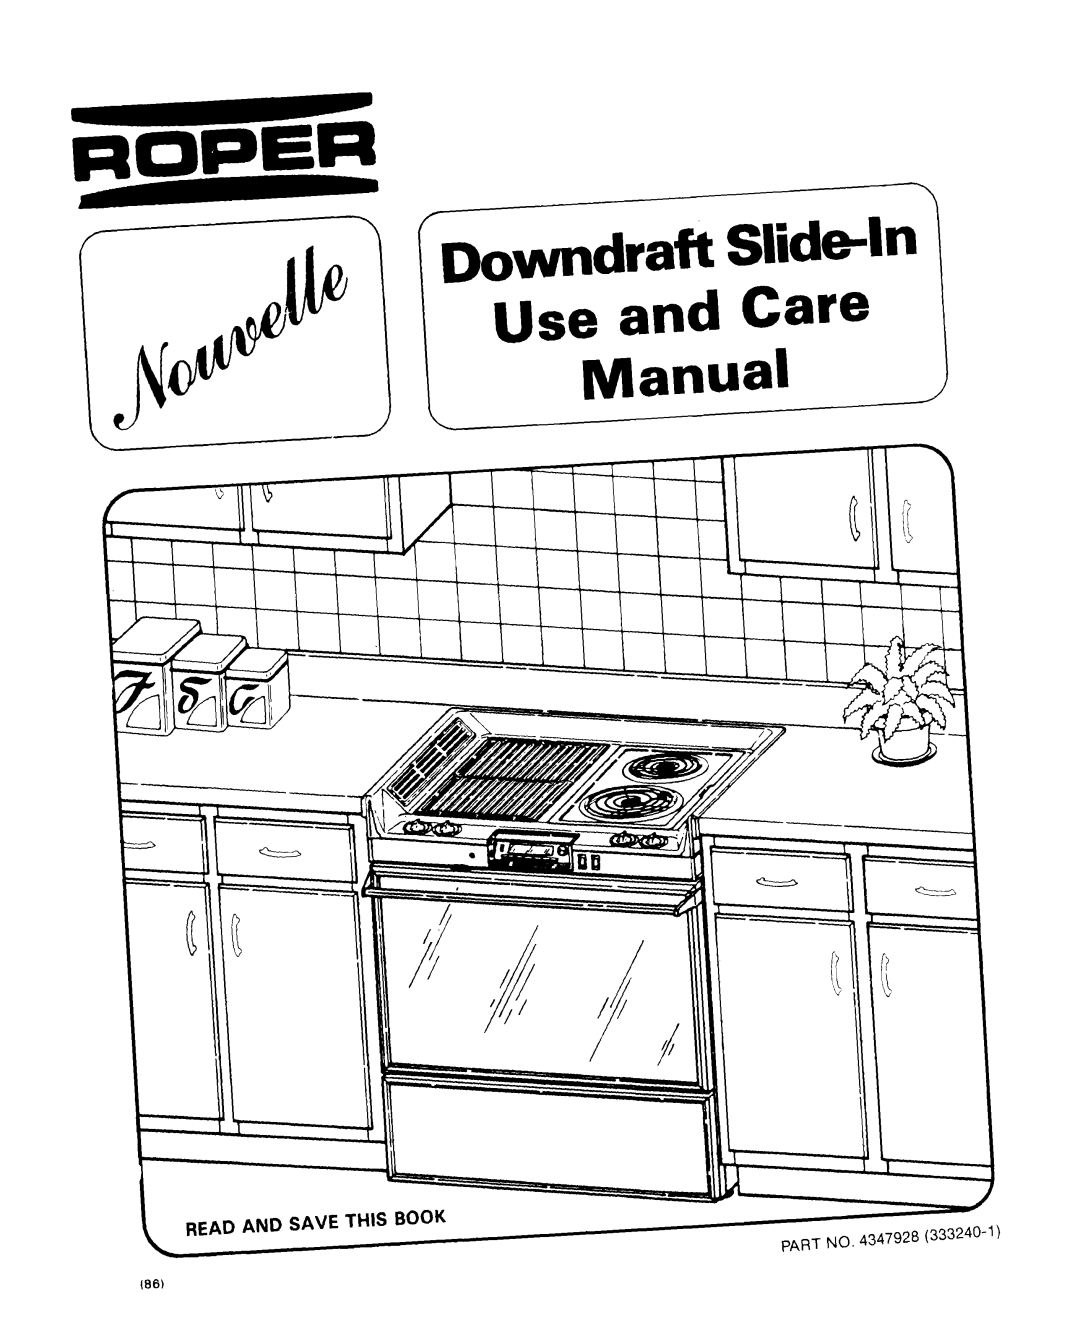 Roper 4347928 (333240-1) manual owndraft Slide-InUse and Care Manual, Al-I, Read And Save This, Book 